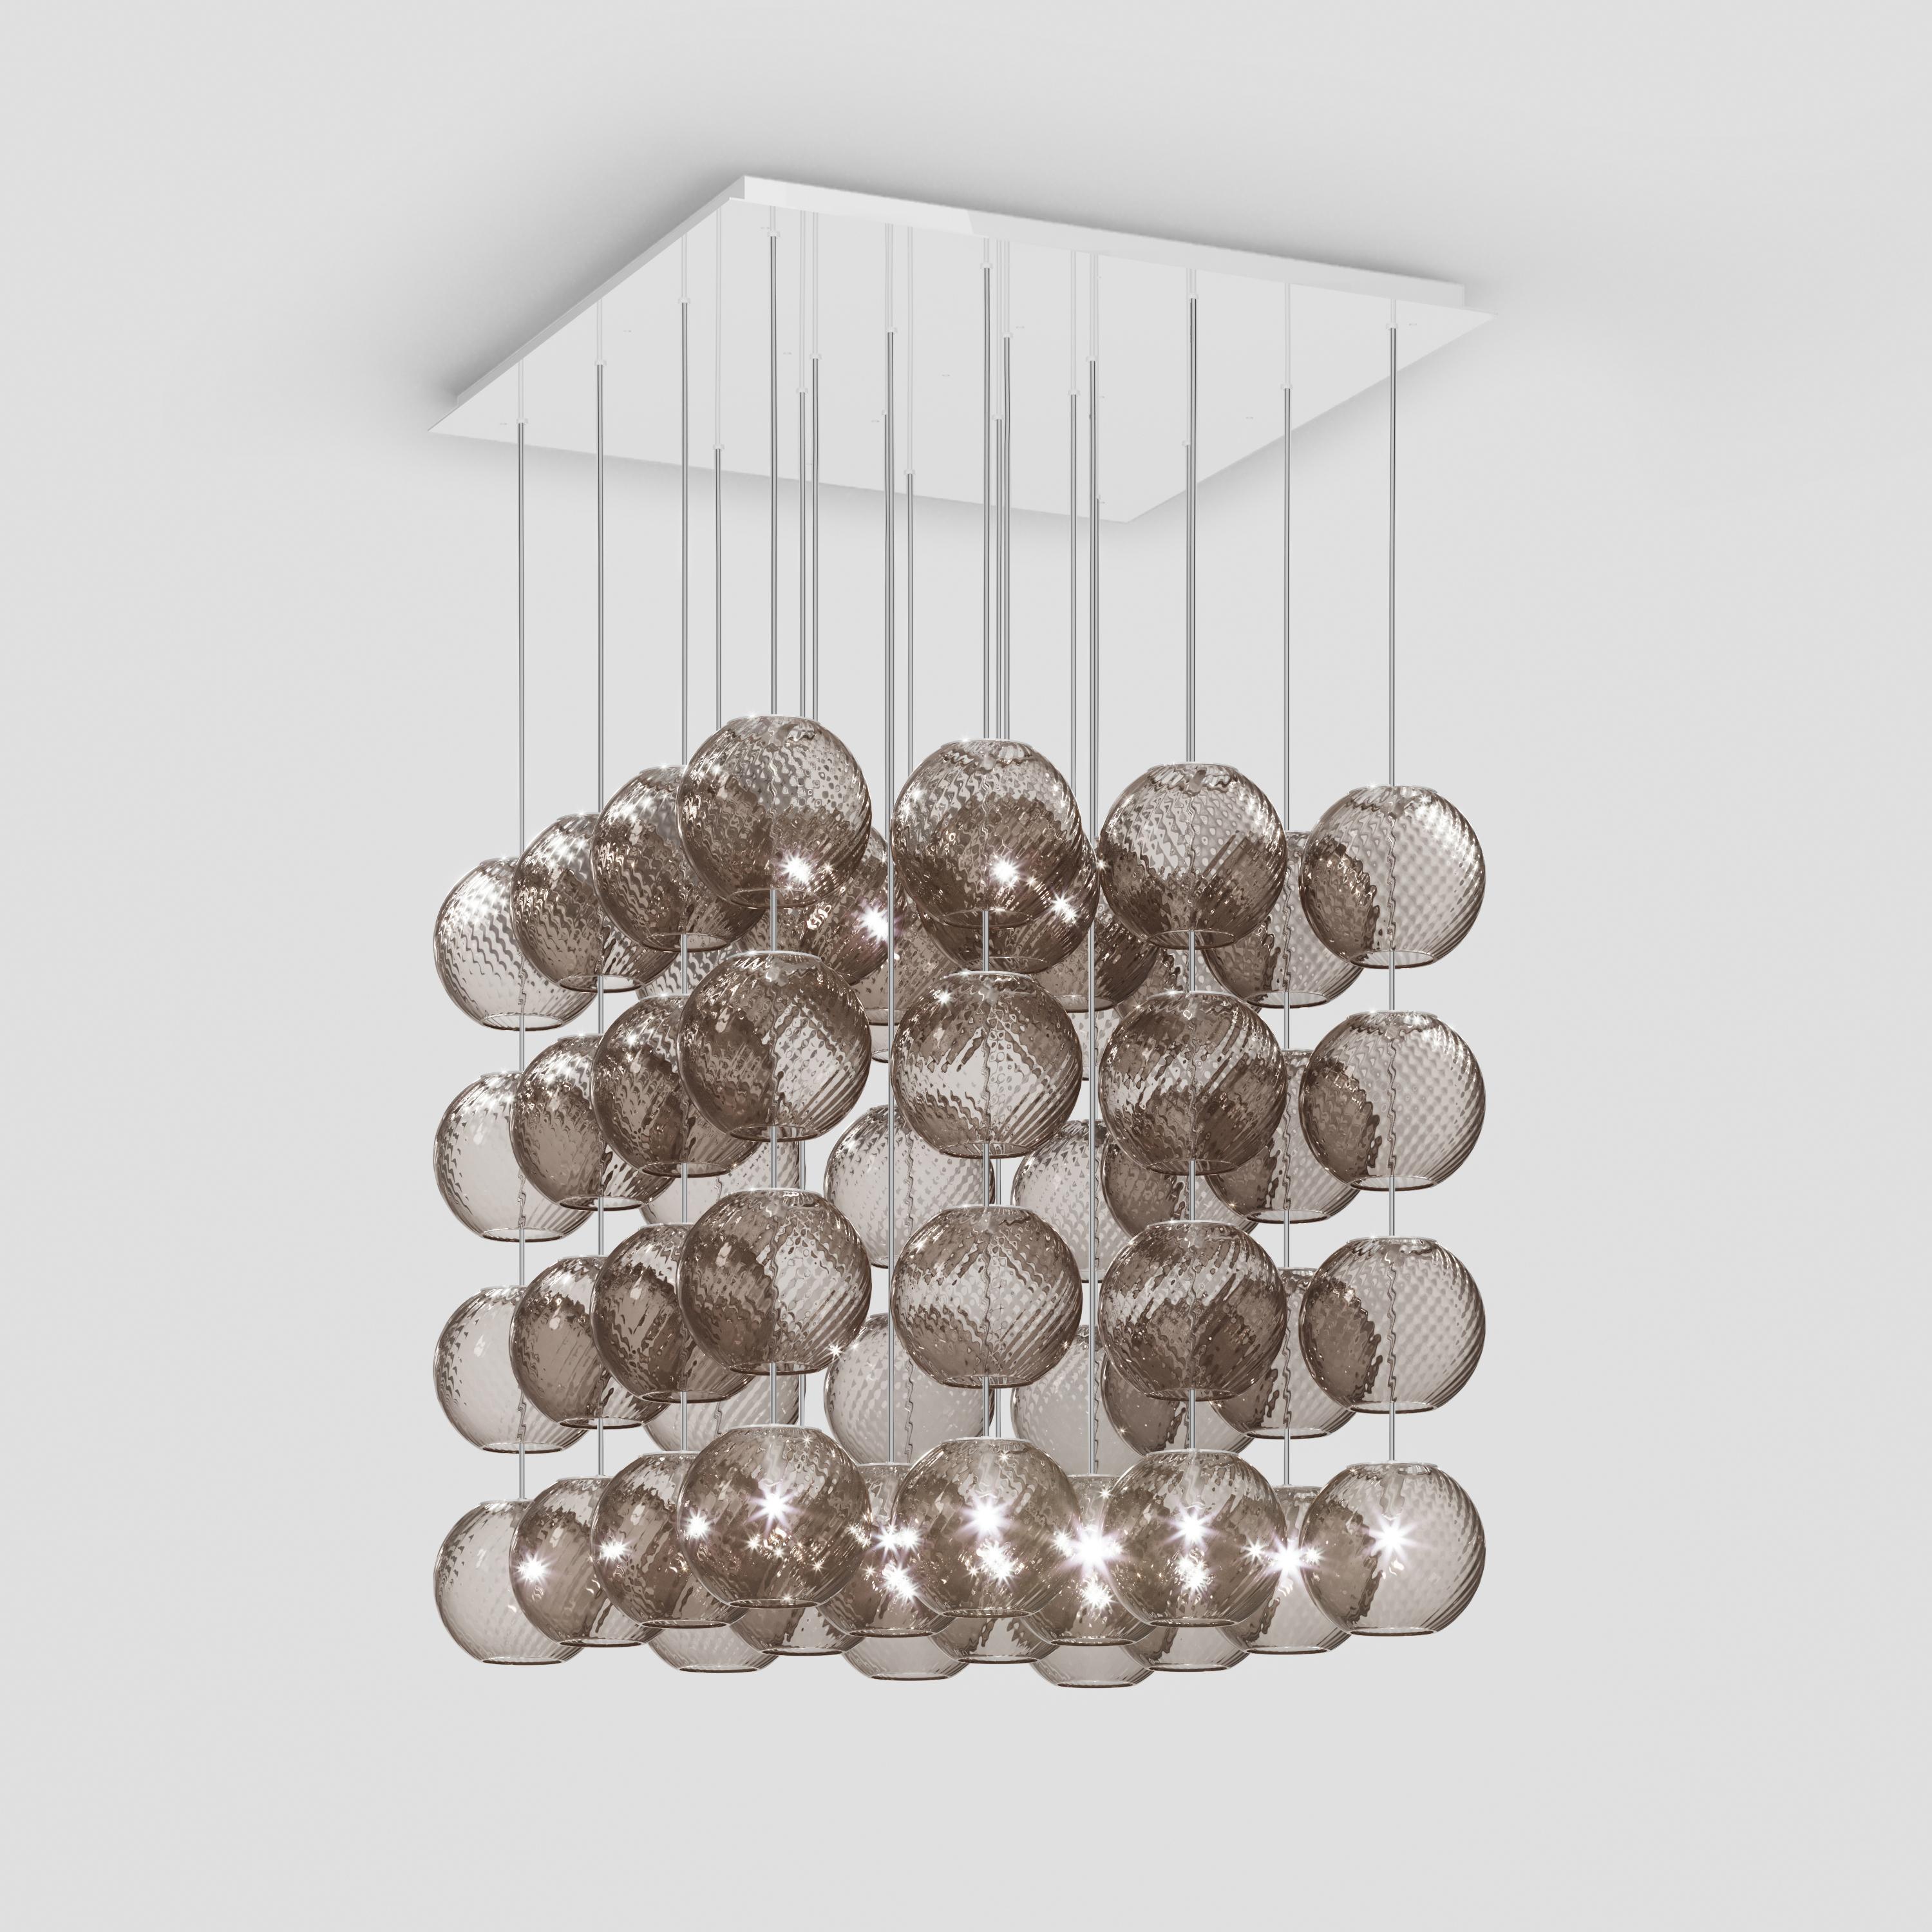 Spherical blown glass elements available in three sizes and four rigadin colours, with and without lighting source. The special design allows the vertical installation of several glass elements and infinite customized